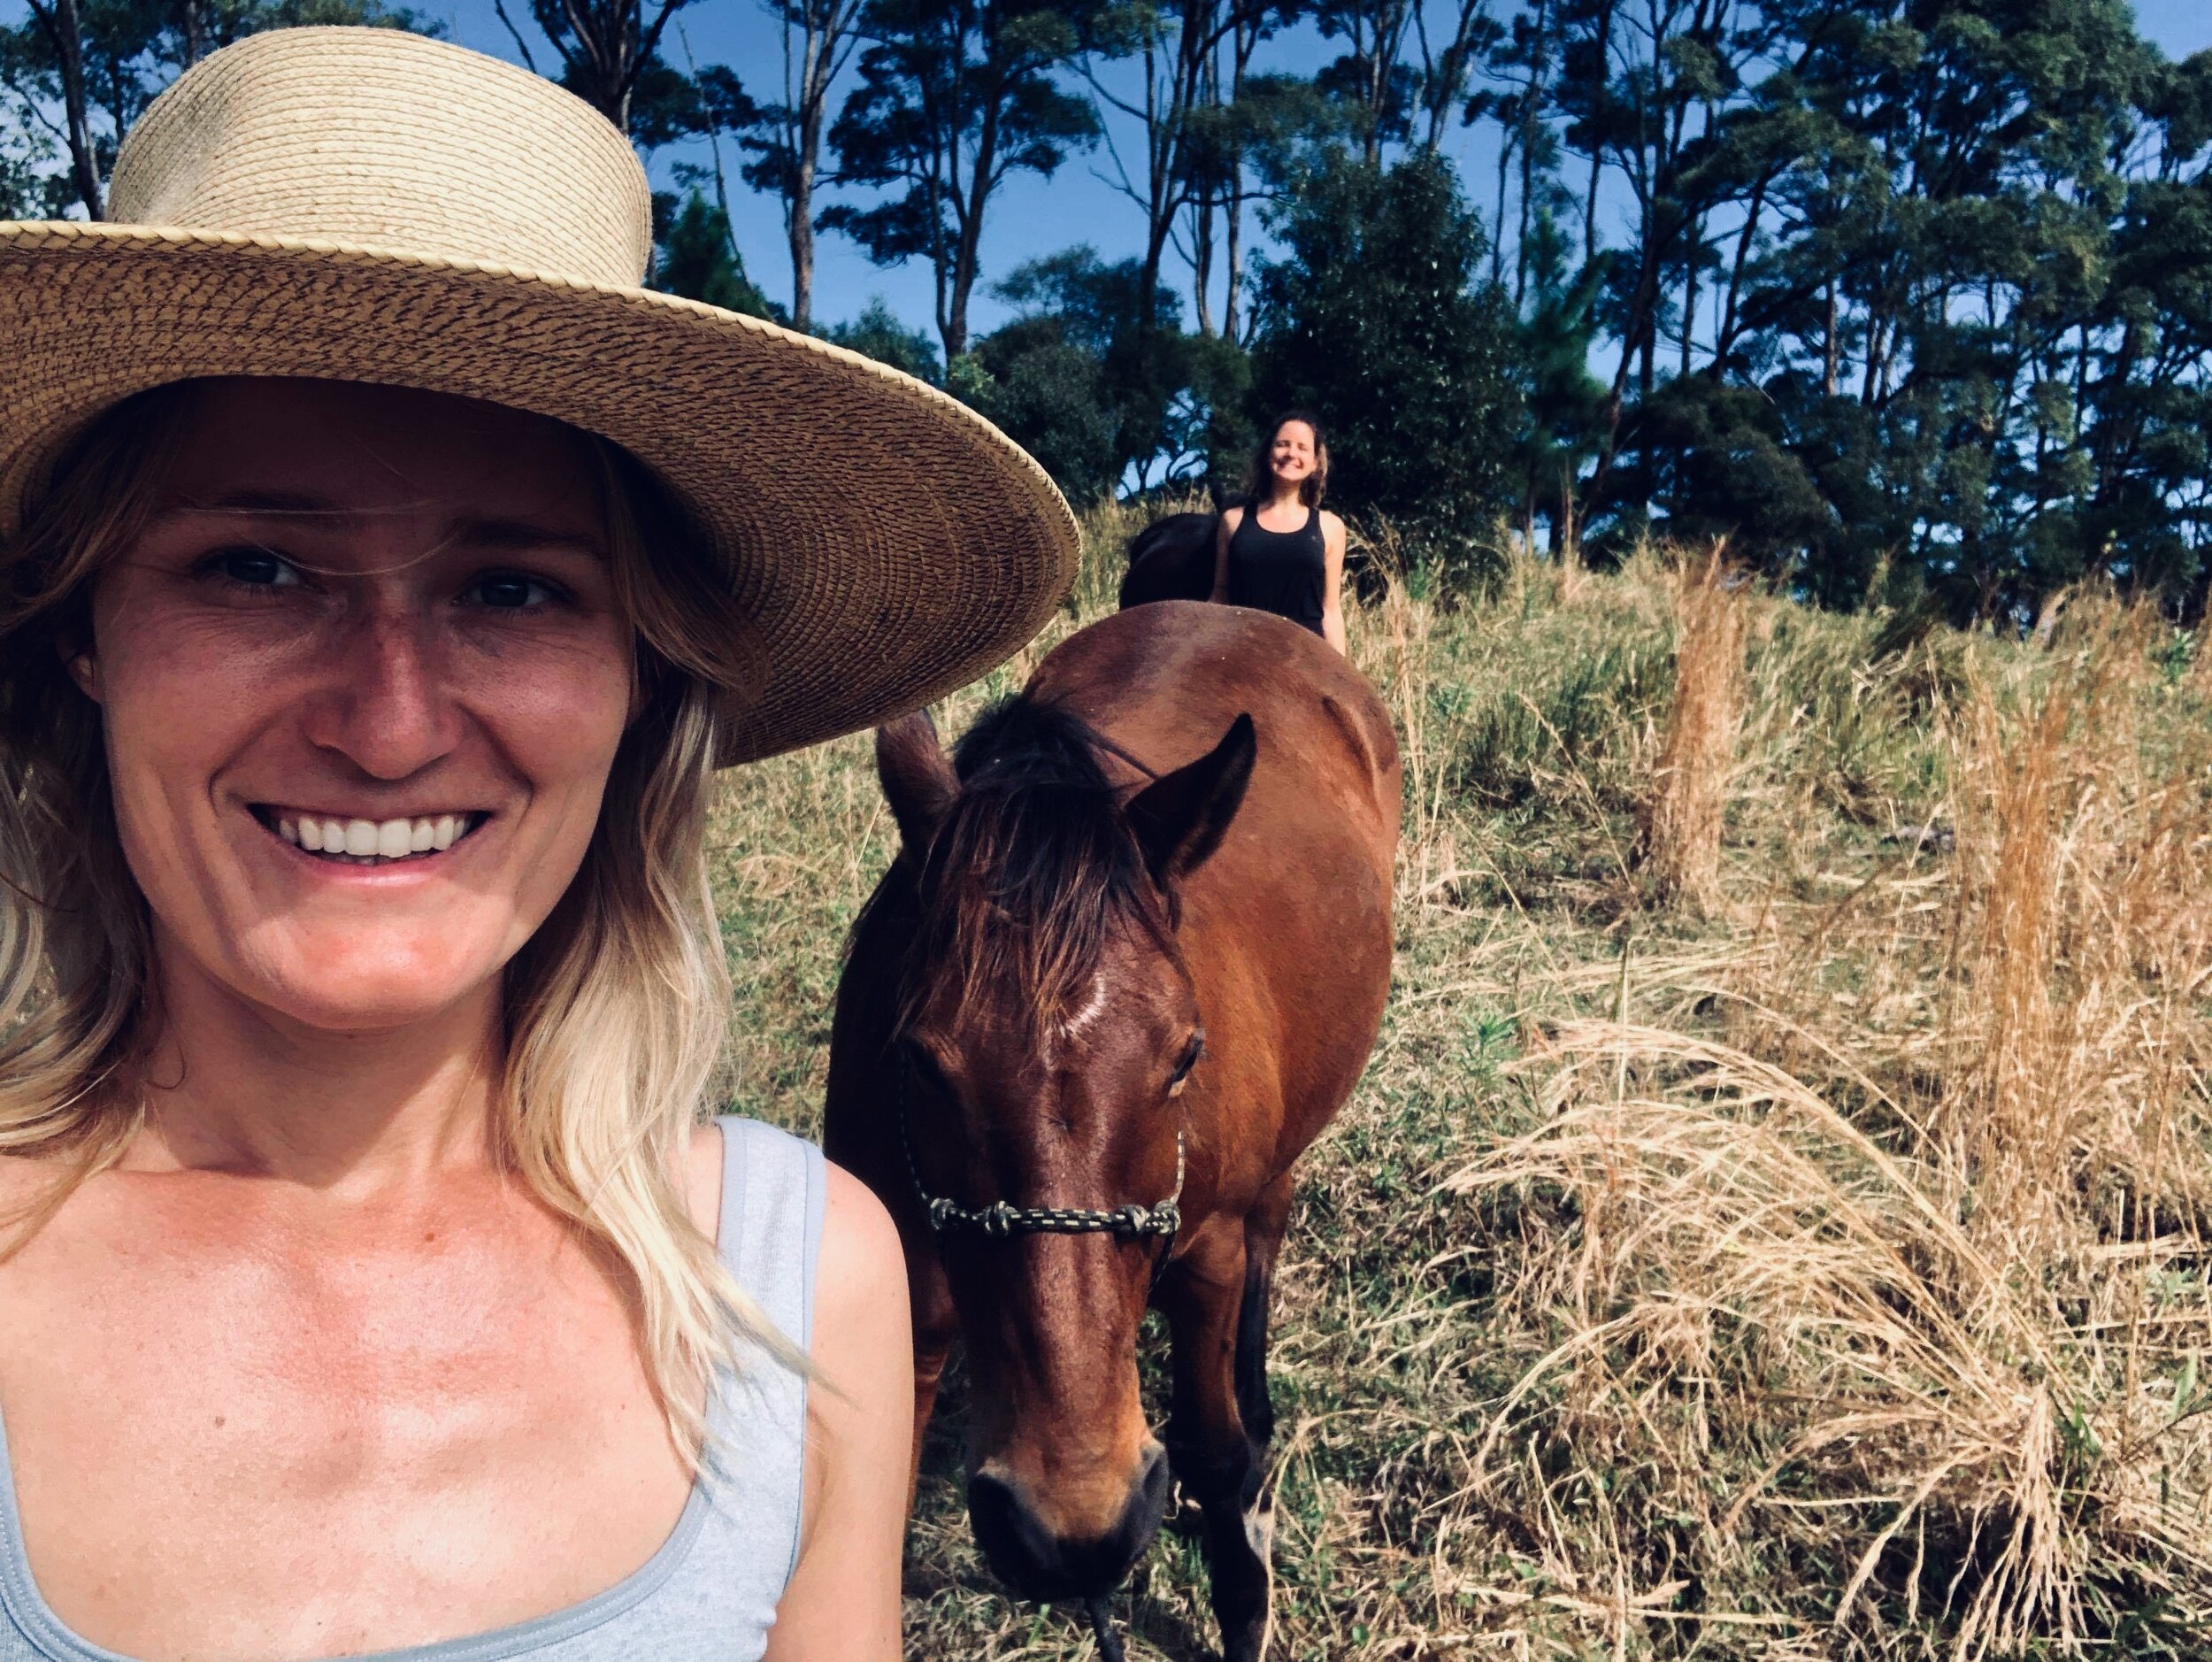 Breathwork meditation cacao ceremony mindfulness Love Connection loving kindness woman’s circle sacred sisters one with nature conscious Connections horse lover nature lover 34452.JPG